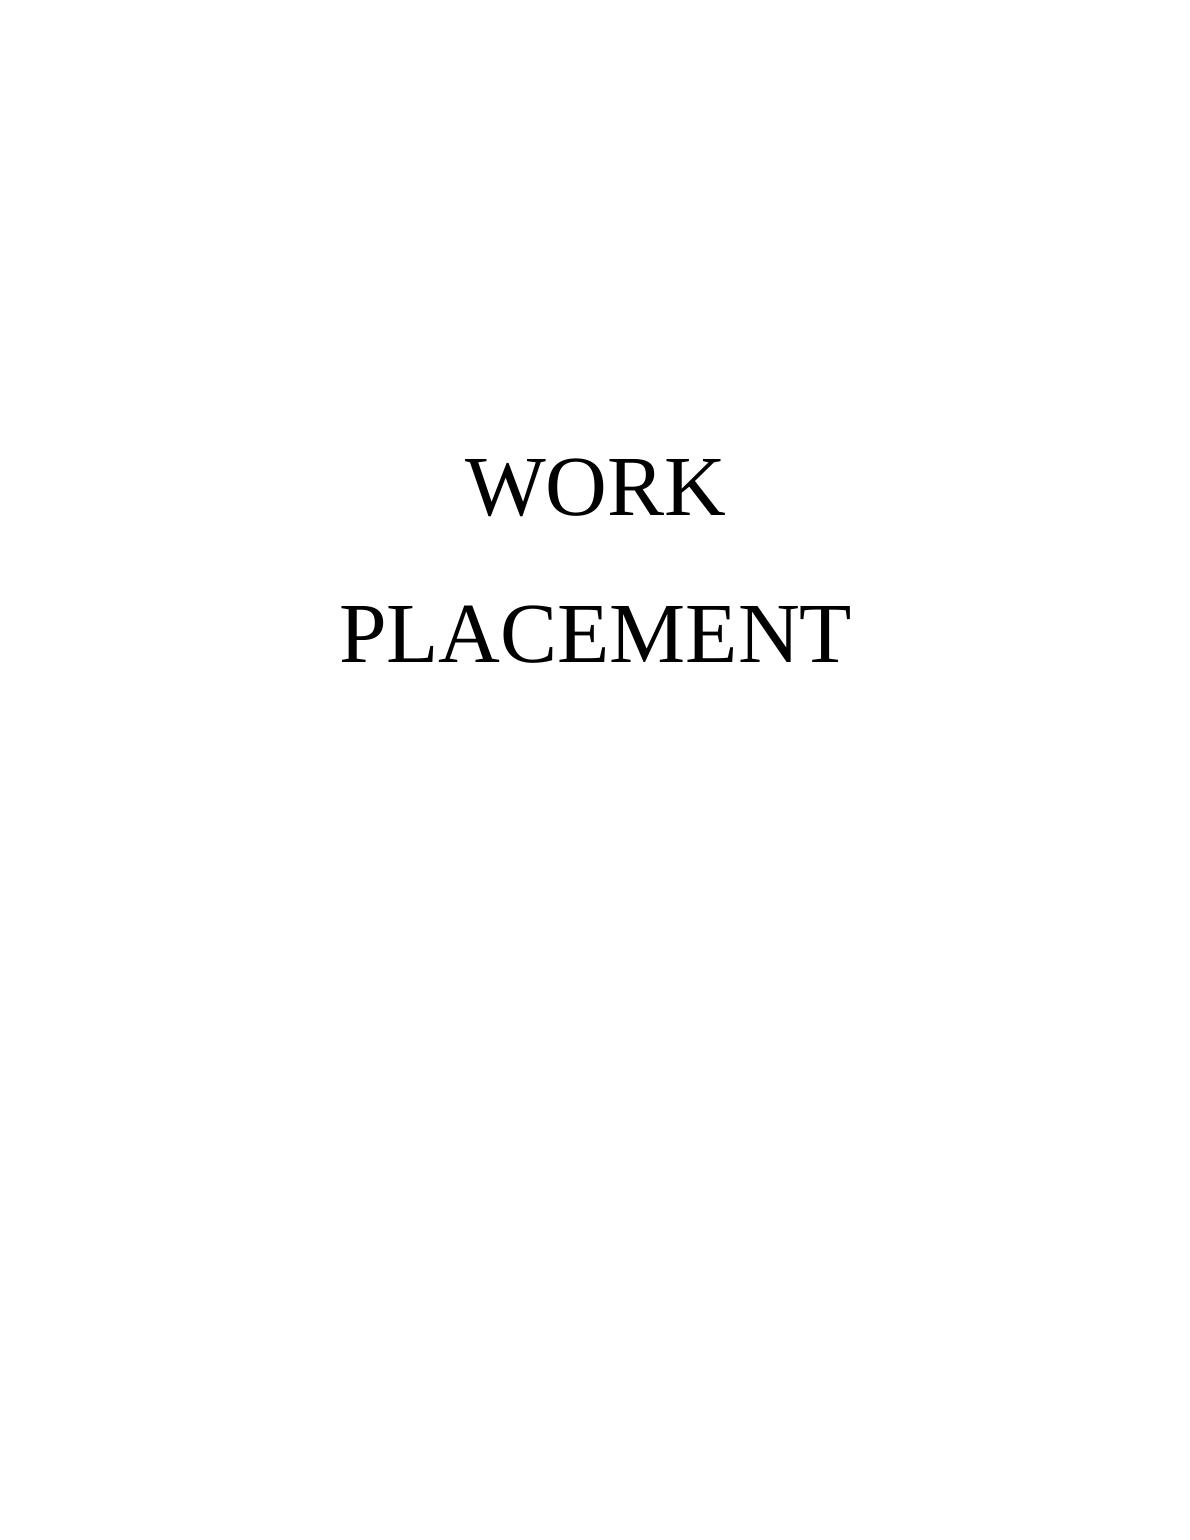 Work Experience Assignment_1